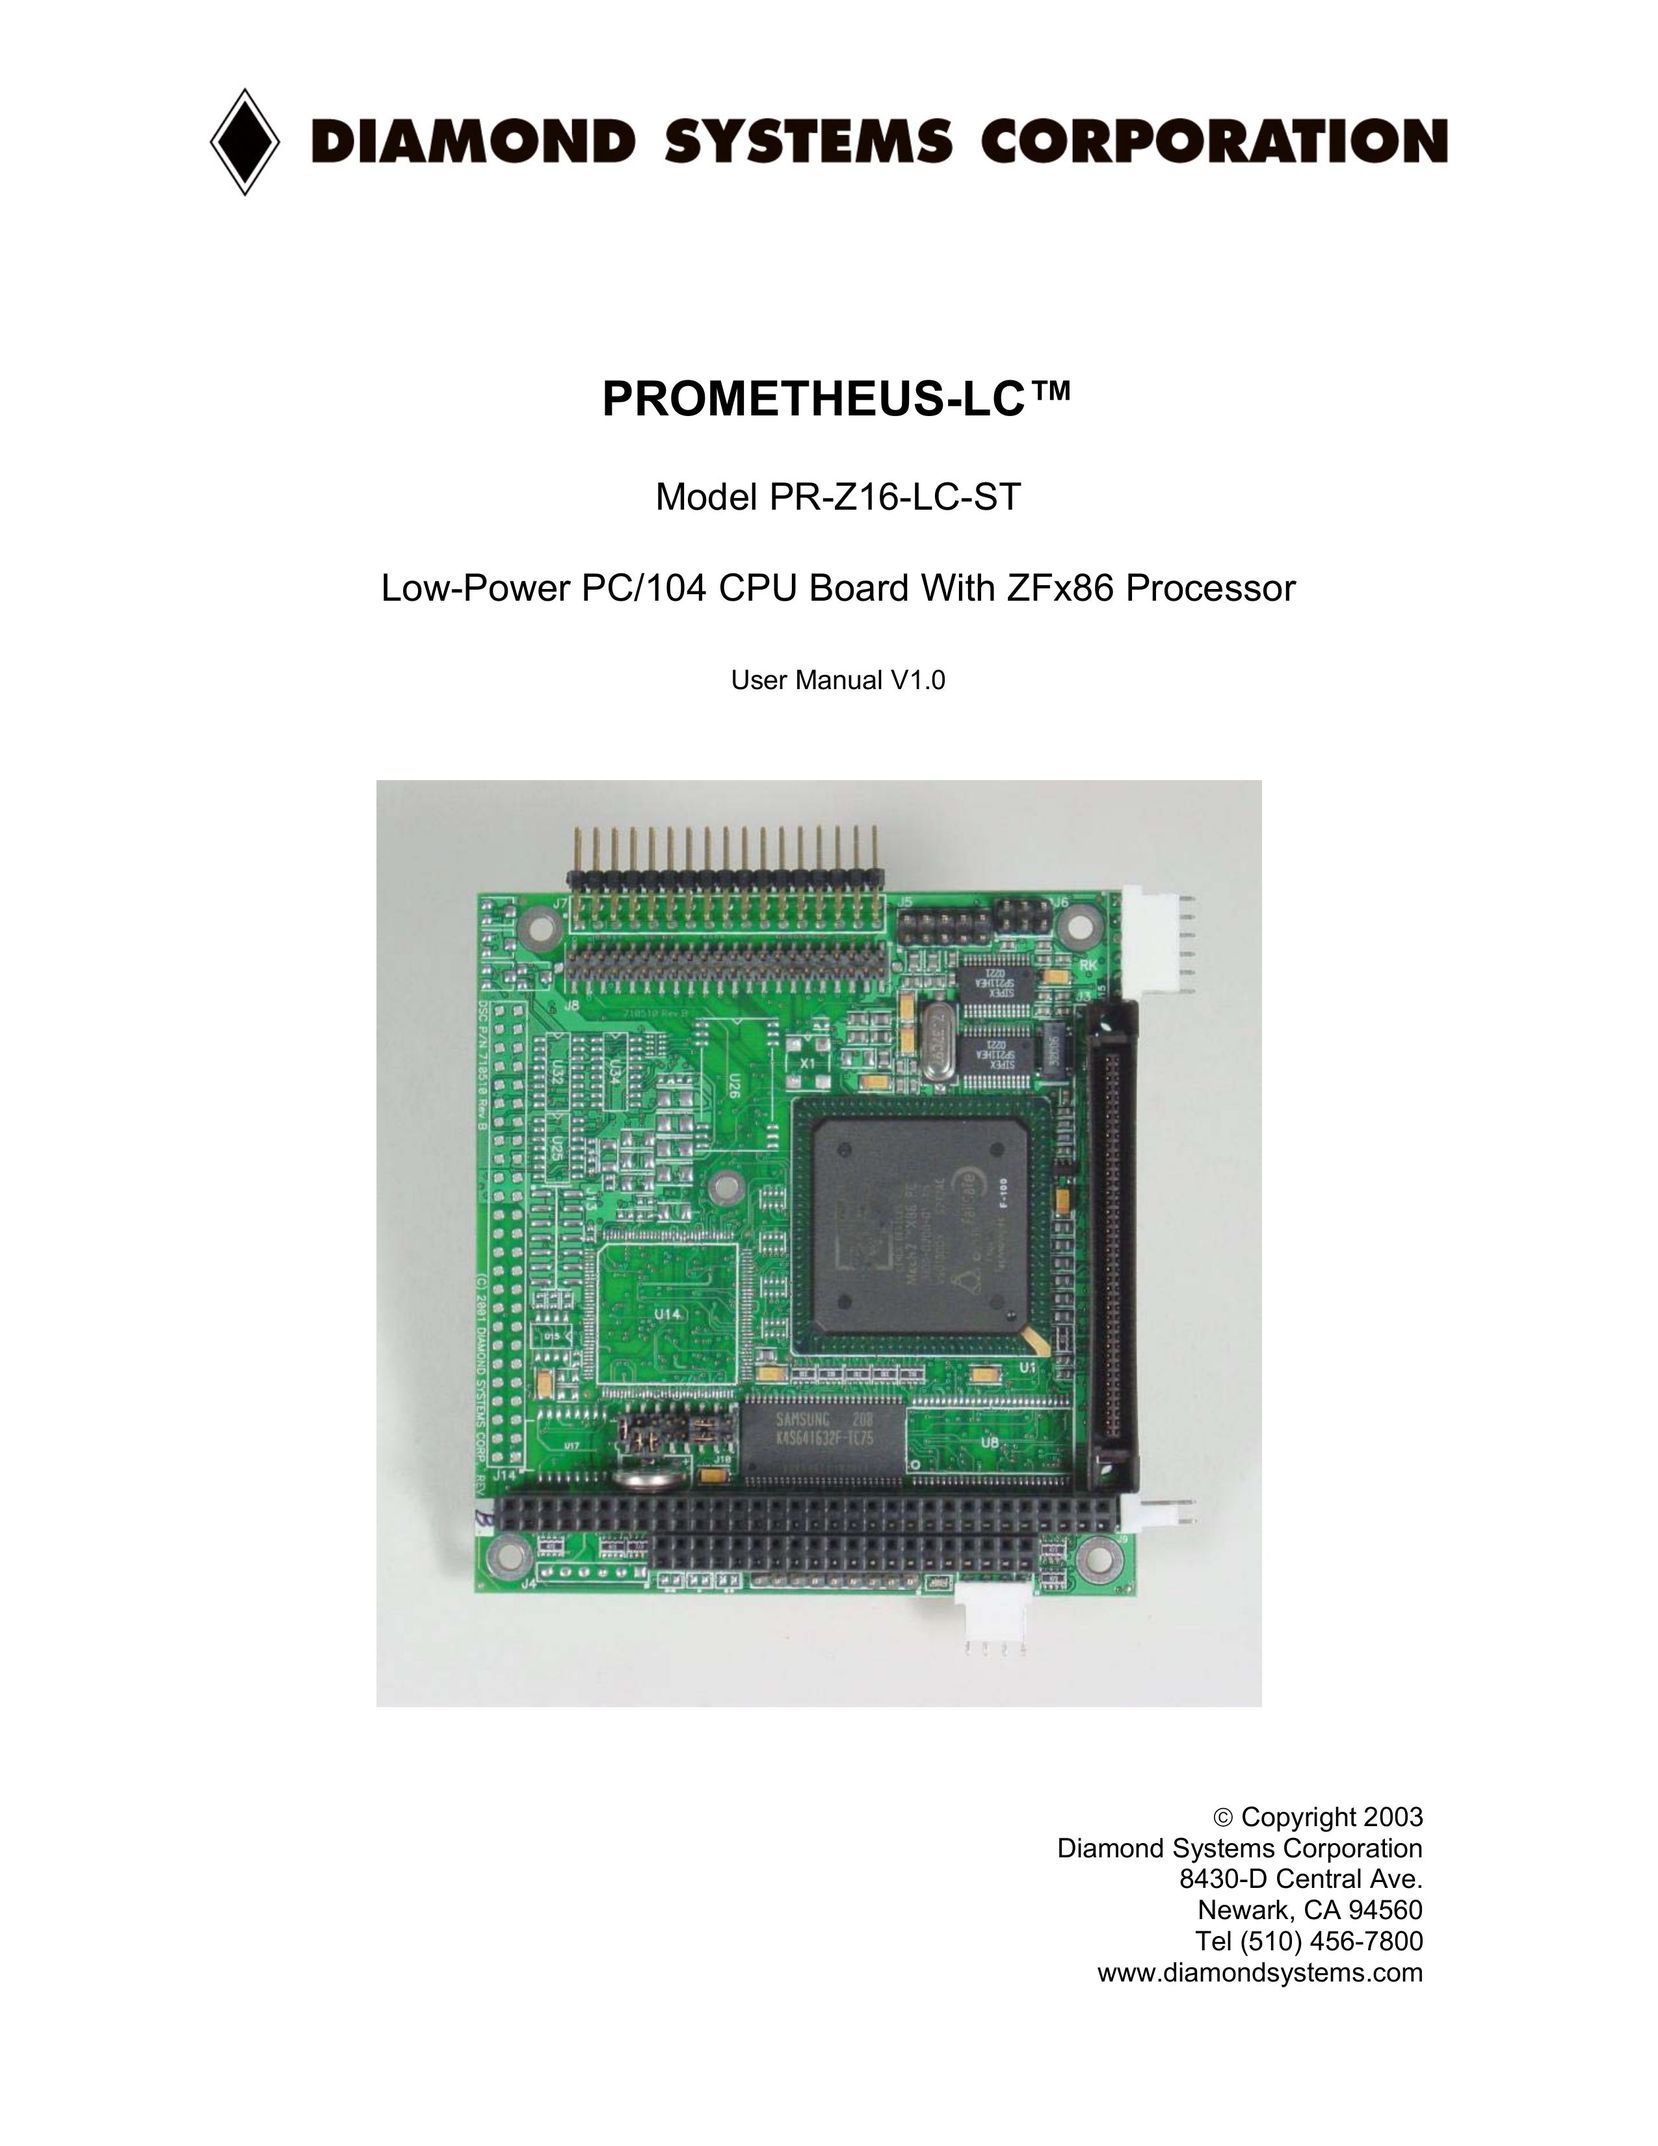 Diamond Systems Low-Power PC/104 CPU Board With ZFx86 Processor Computer Hardware User Manual